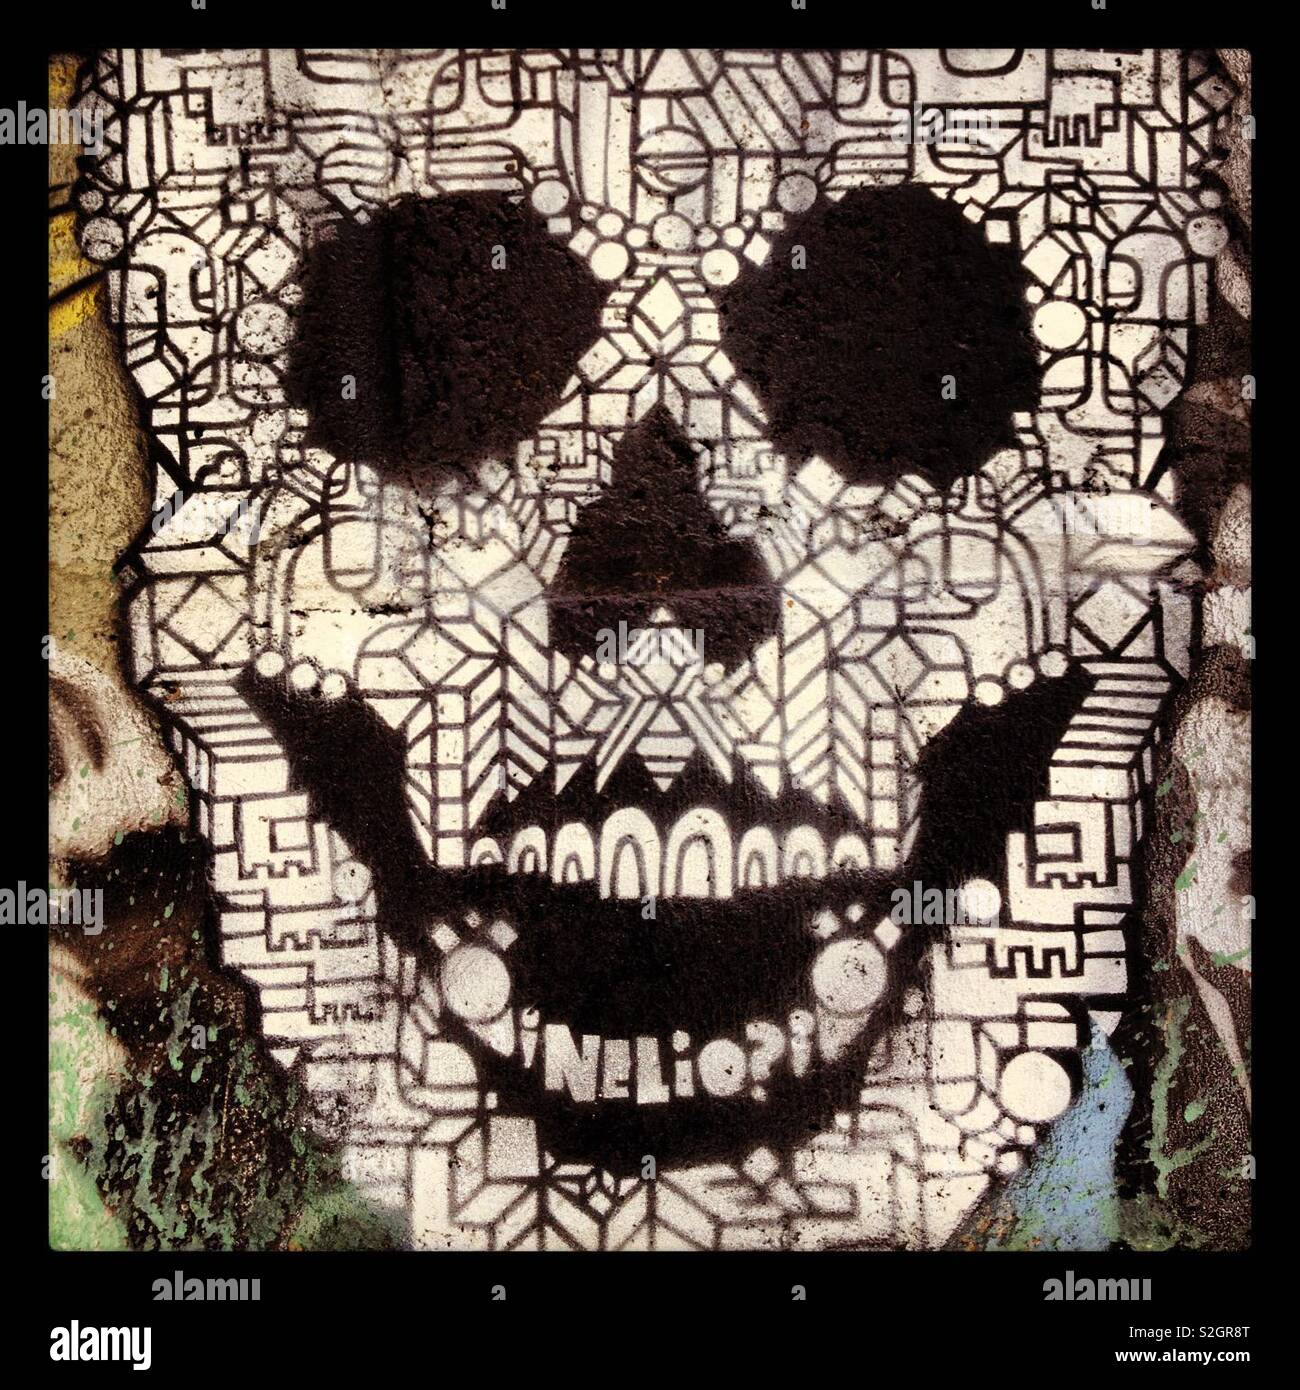 A closeup of an intricate black and white geometric design street art graffiti skull painted on a wall Stock Photo